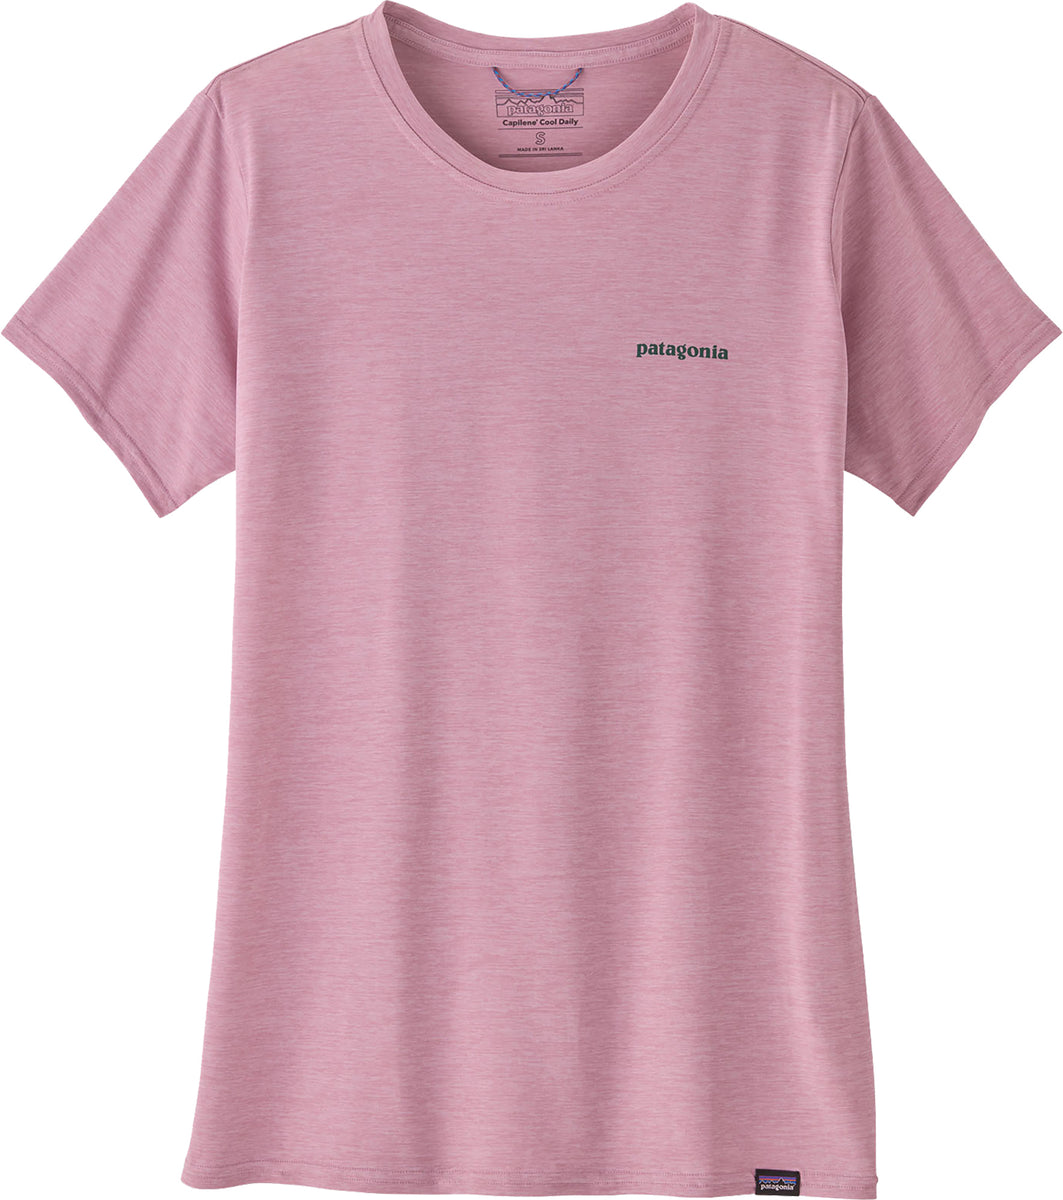 Patagonia Capilene Cool Daily Graphic T-Shirt - Women's